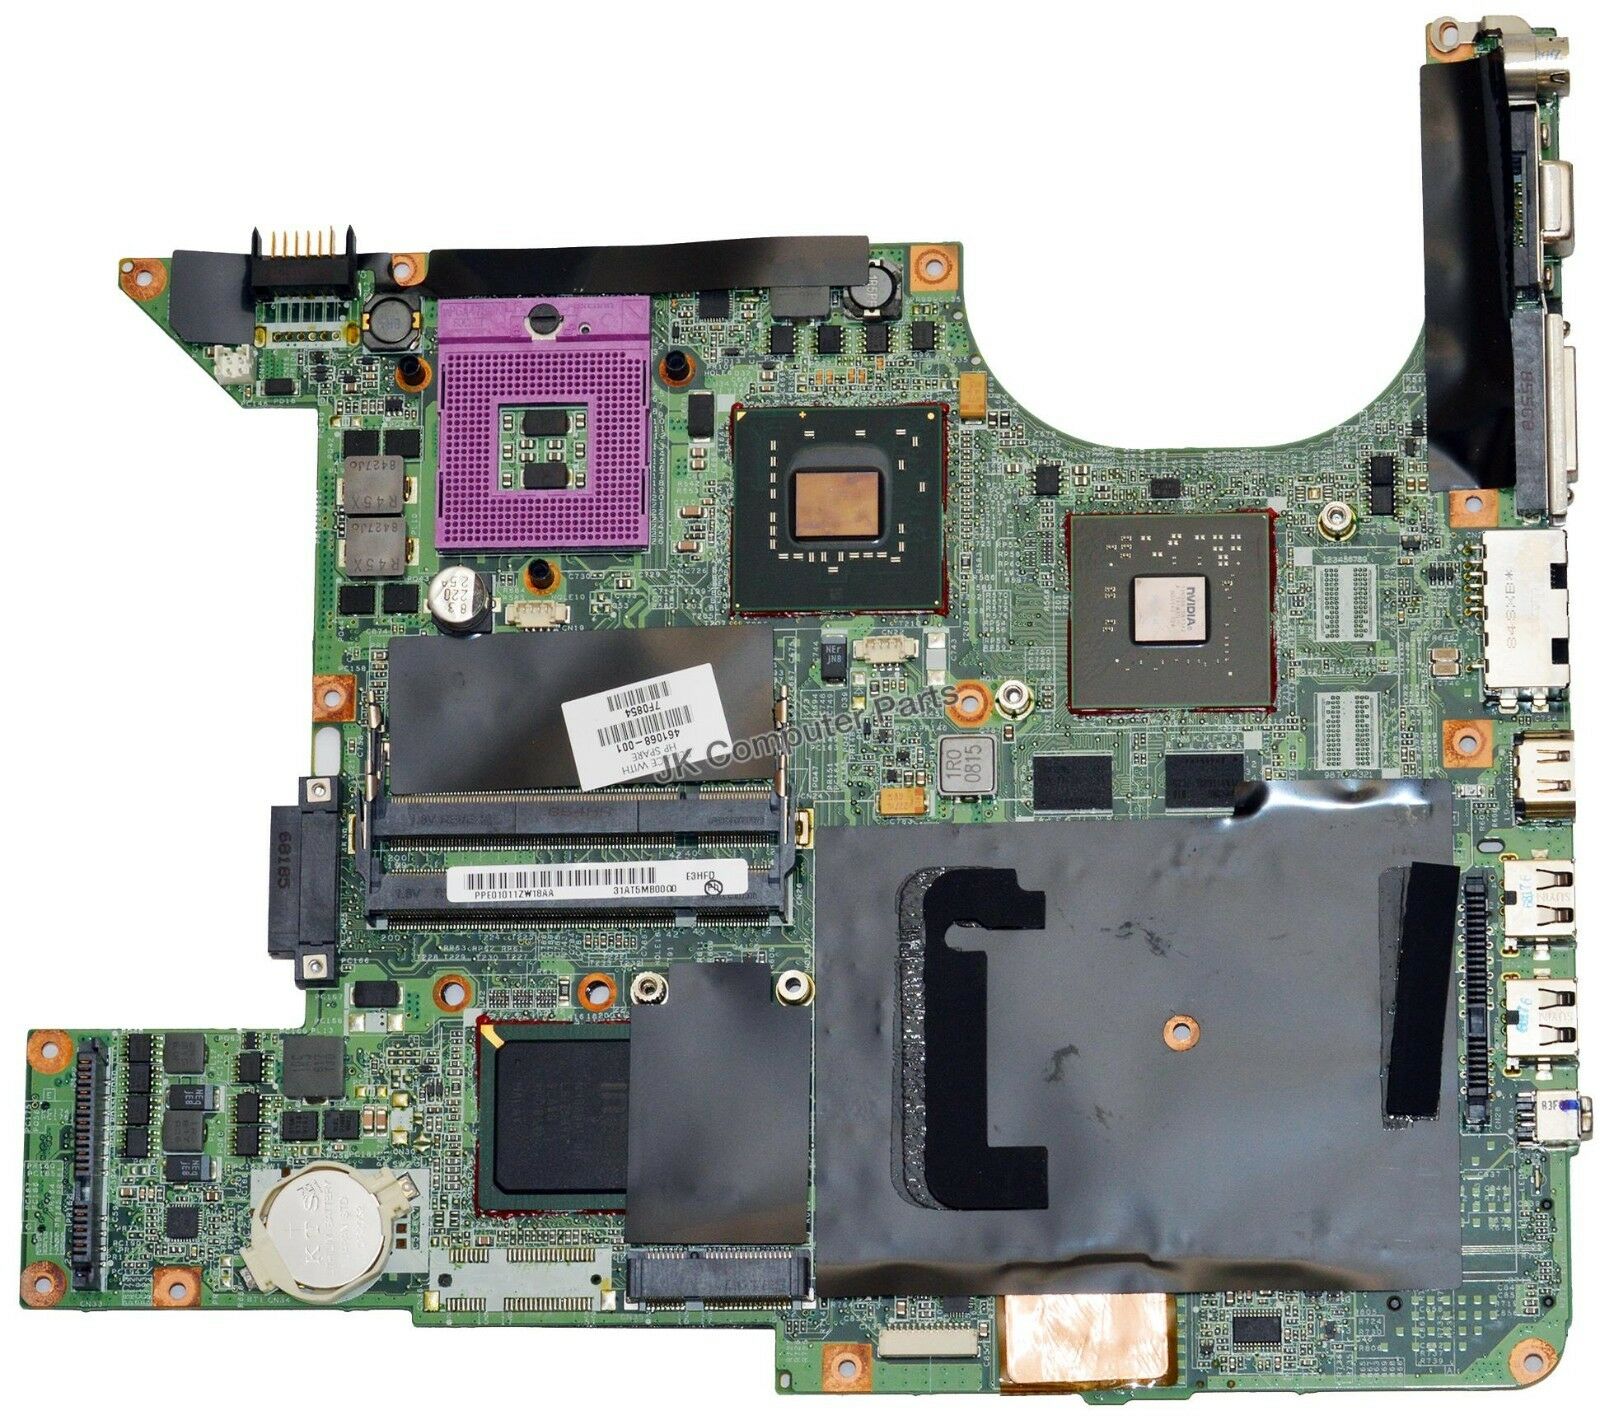 HP DV9700 DV9800 Intel Laptop Motherboard s478 461068-001 This motherboard is tested and is in 100% working